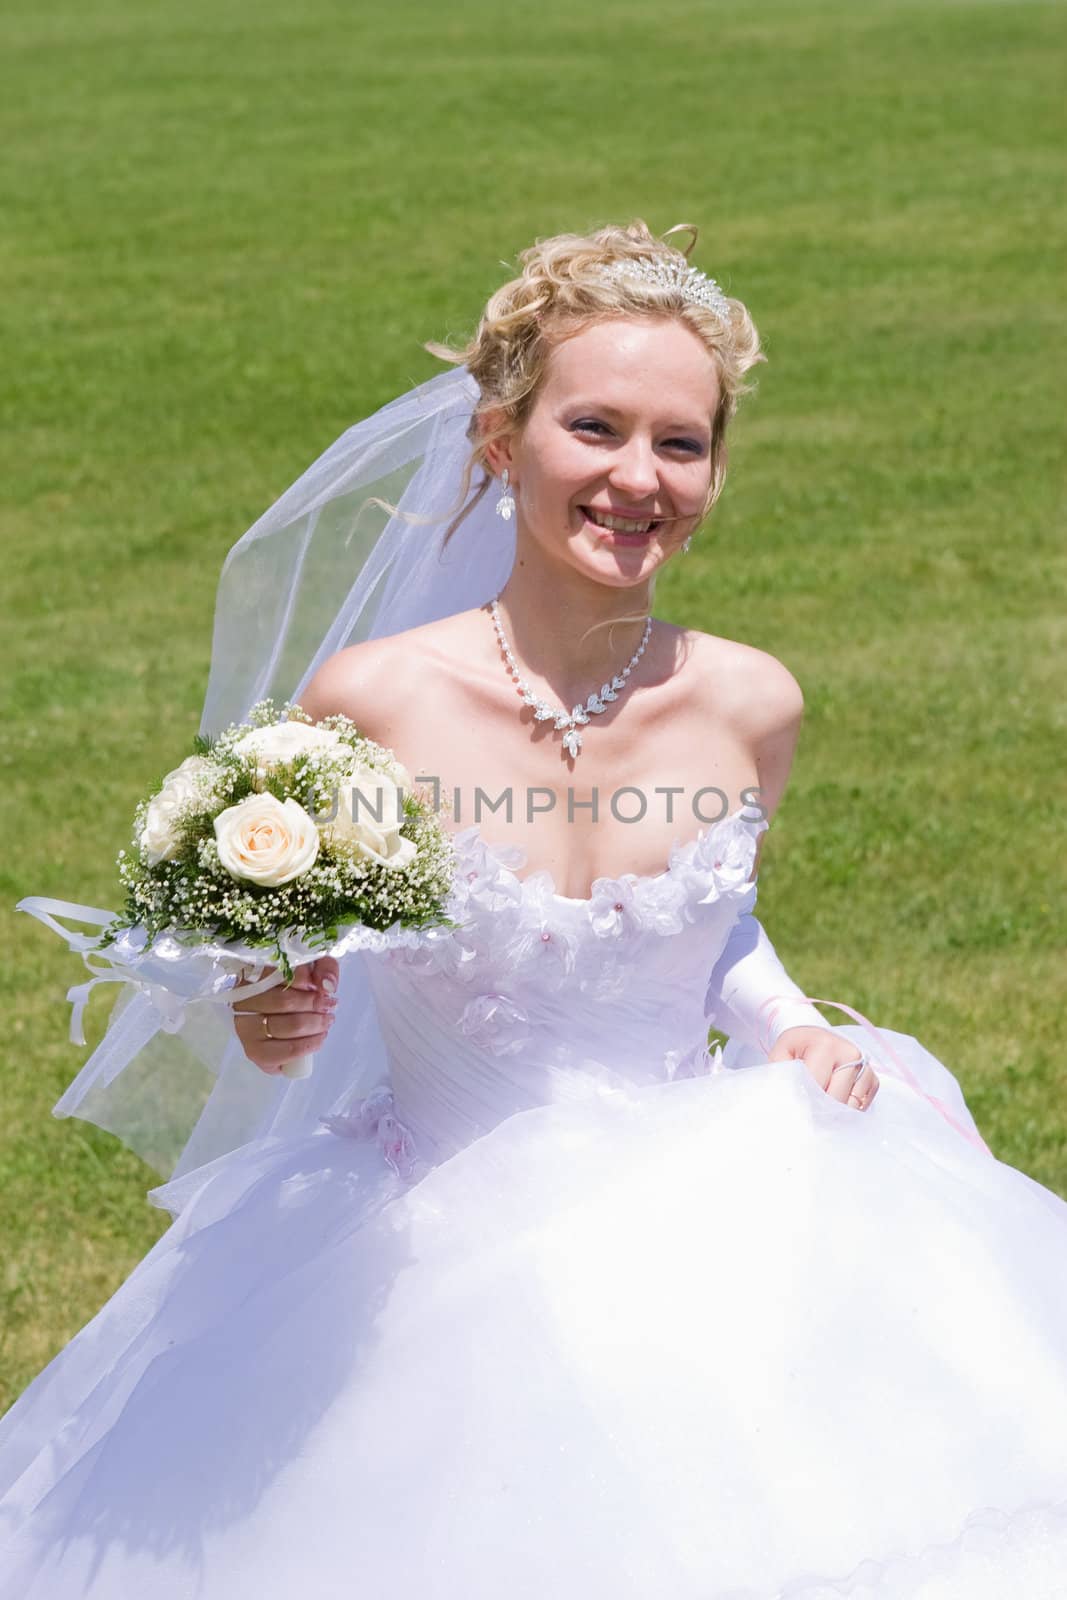 blond bride runs with bouquet of white roses